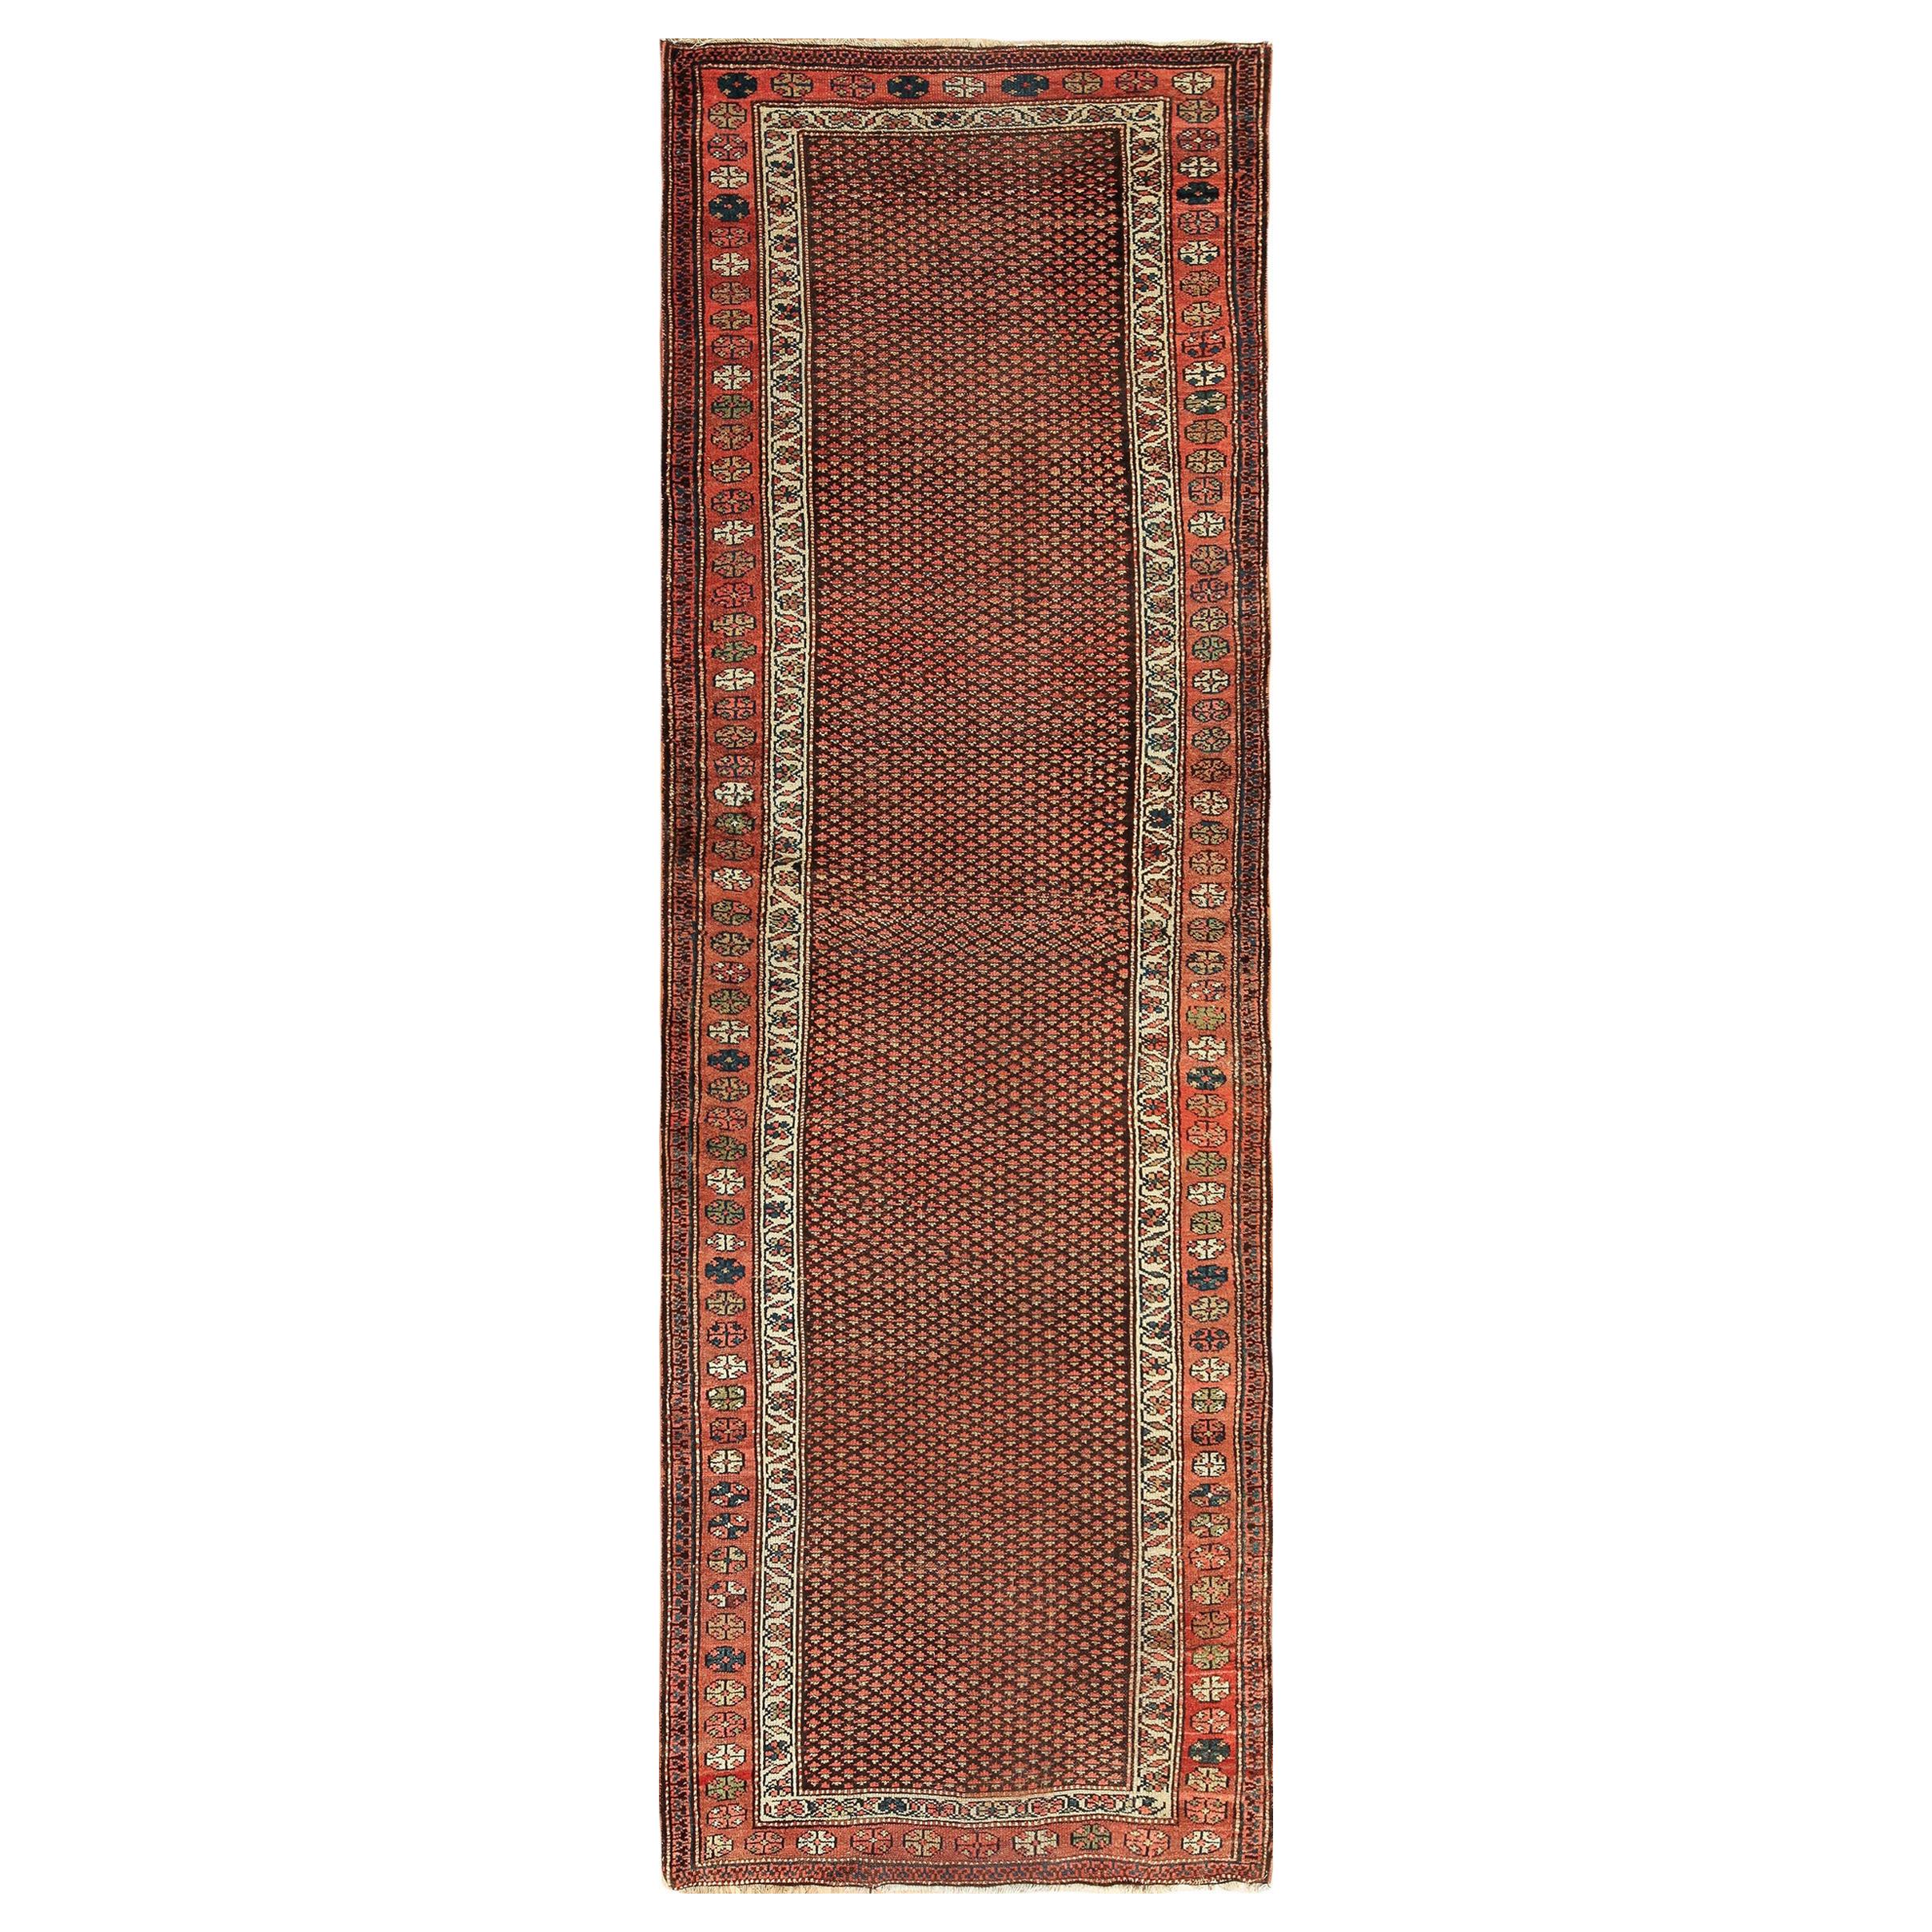 Nazmiyal Antique Northwest Persian Runner Rug. Size: 3 ft 4 in x 10 ft 4 in 